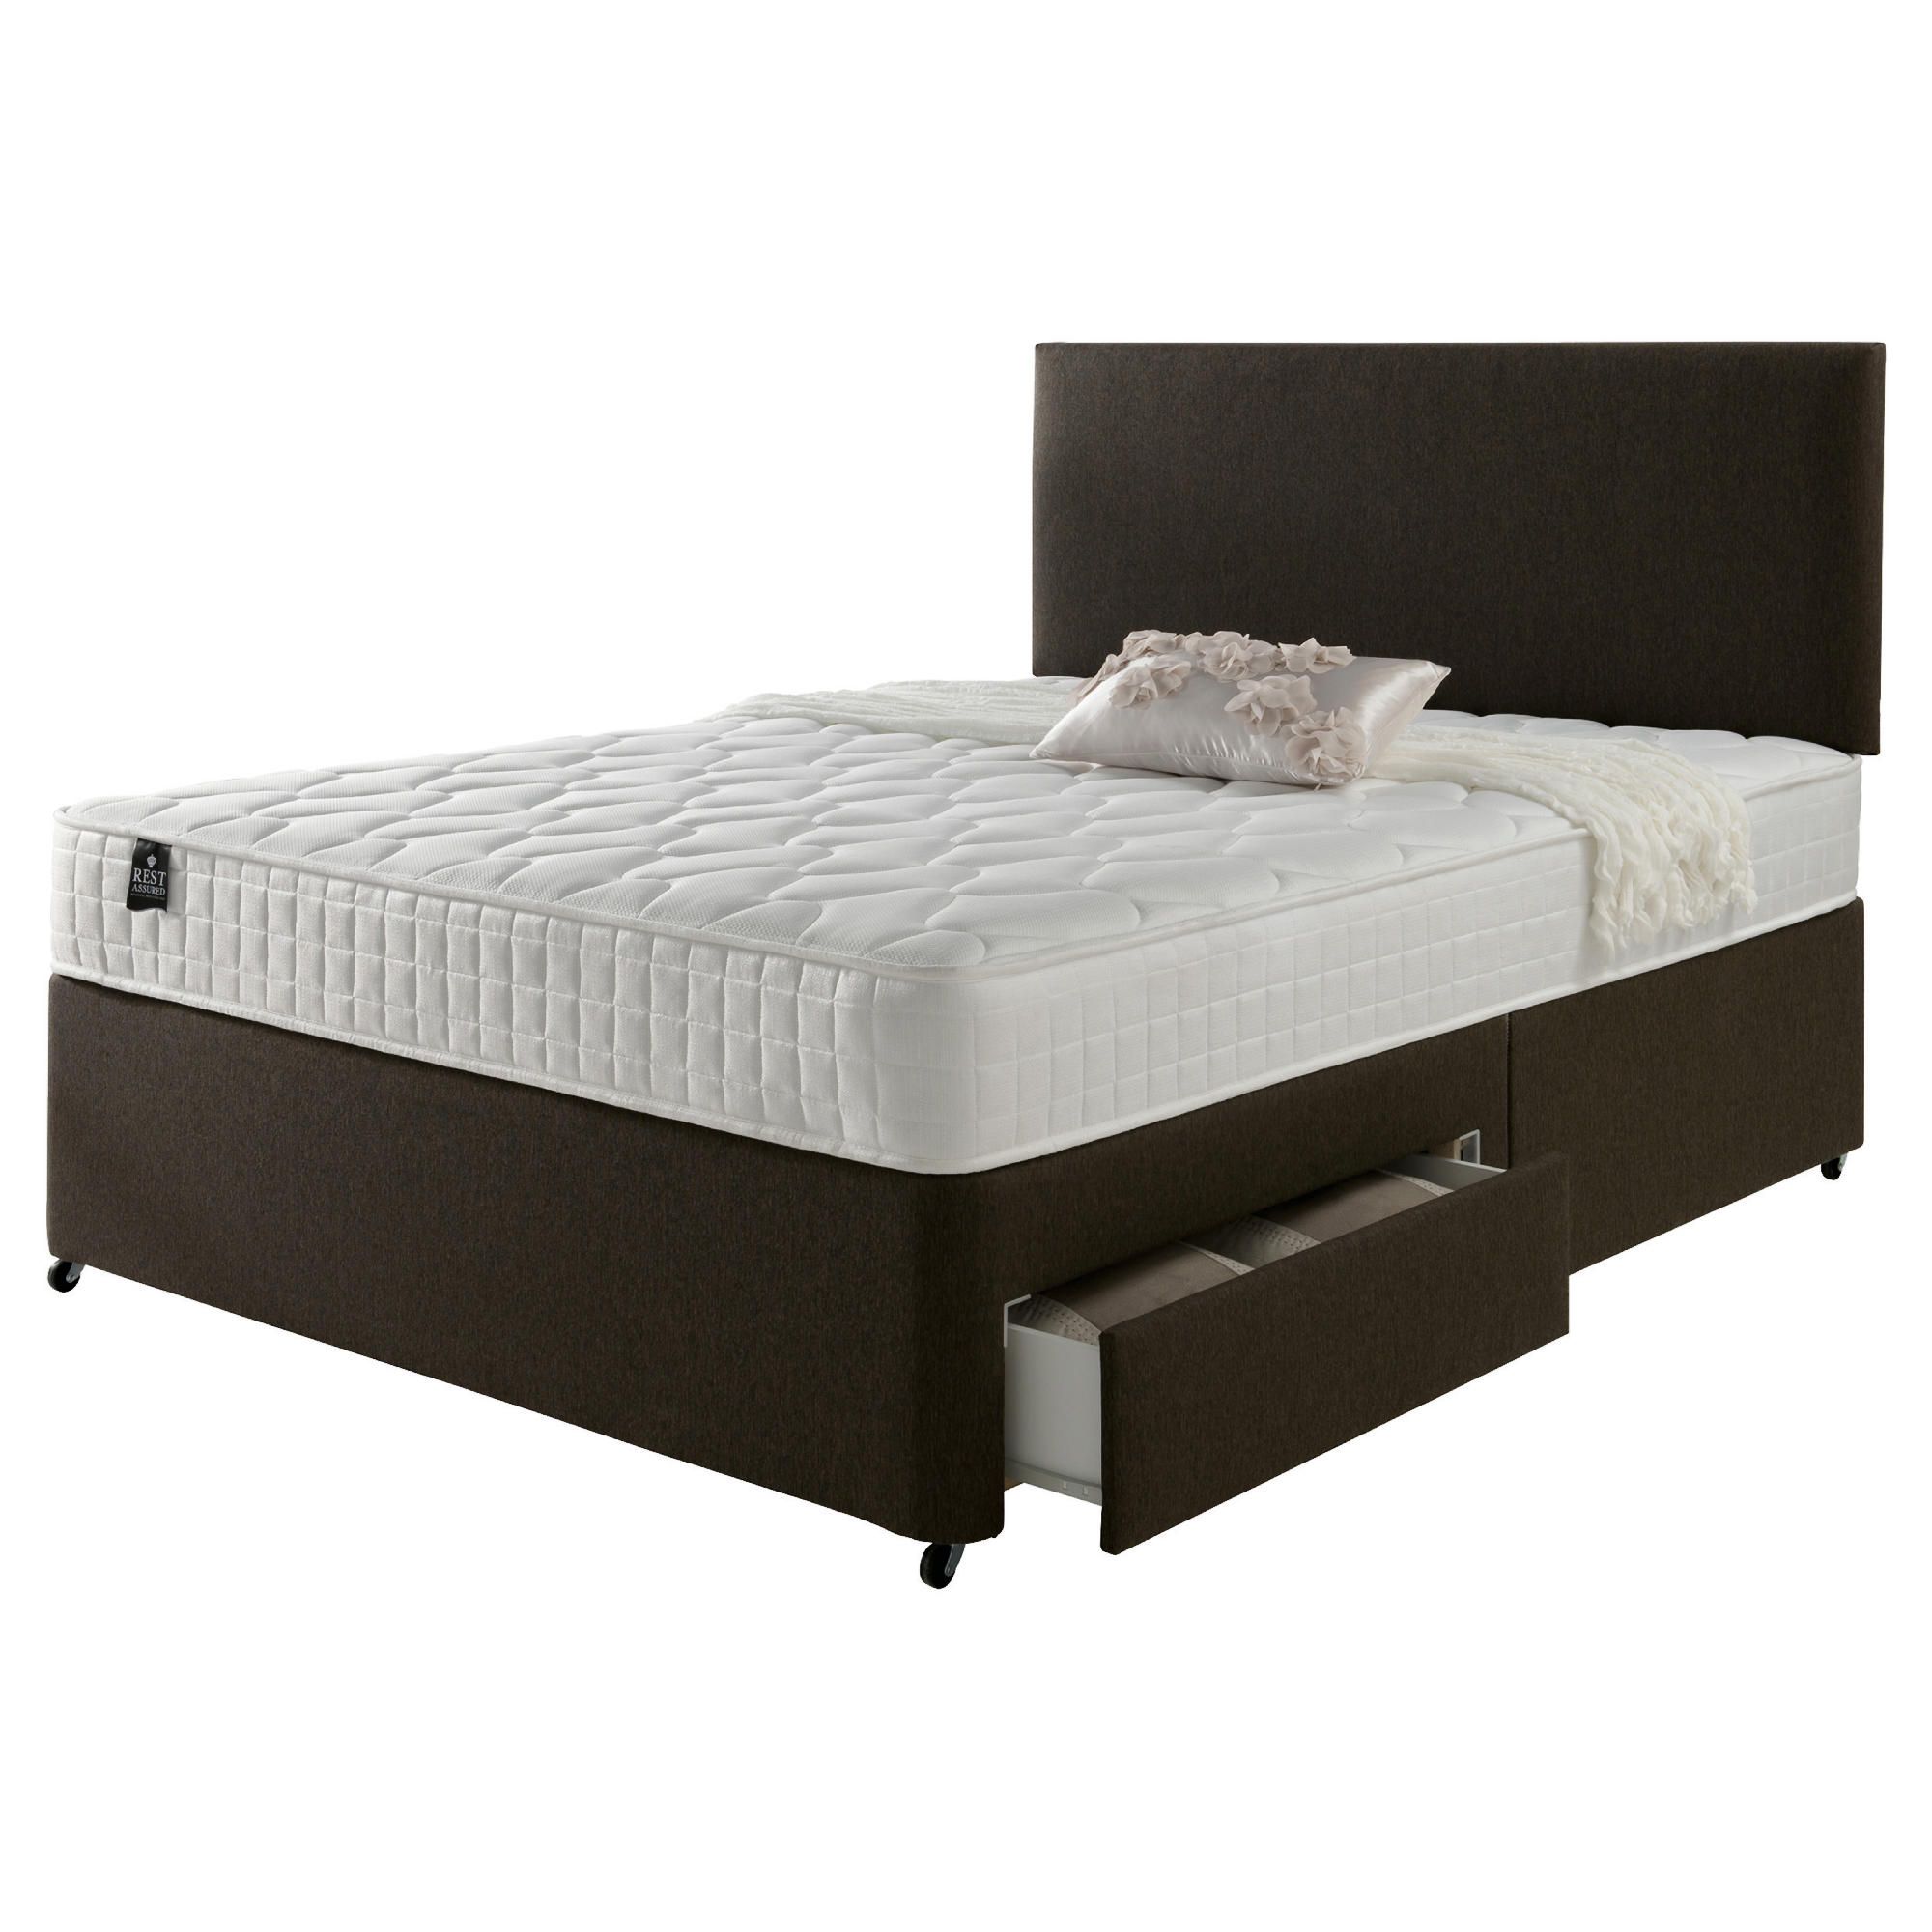 Rest Assured Classic 4 Drawer Double Divan and Headboard Chestnut at Tesco Direct